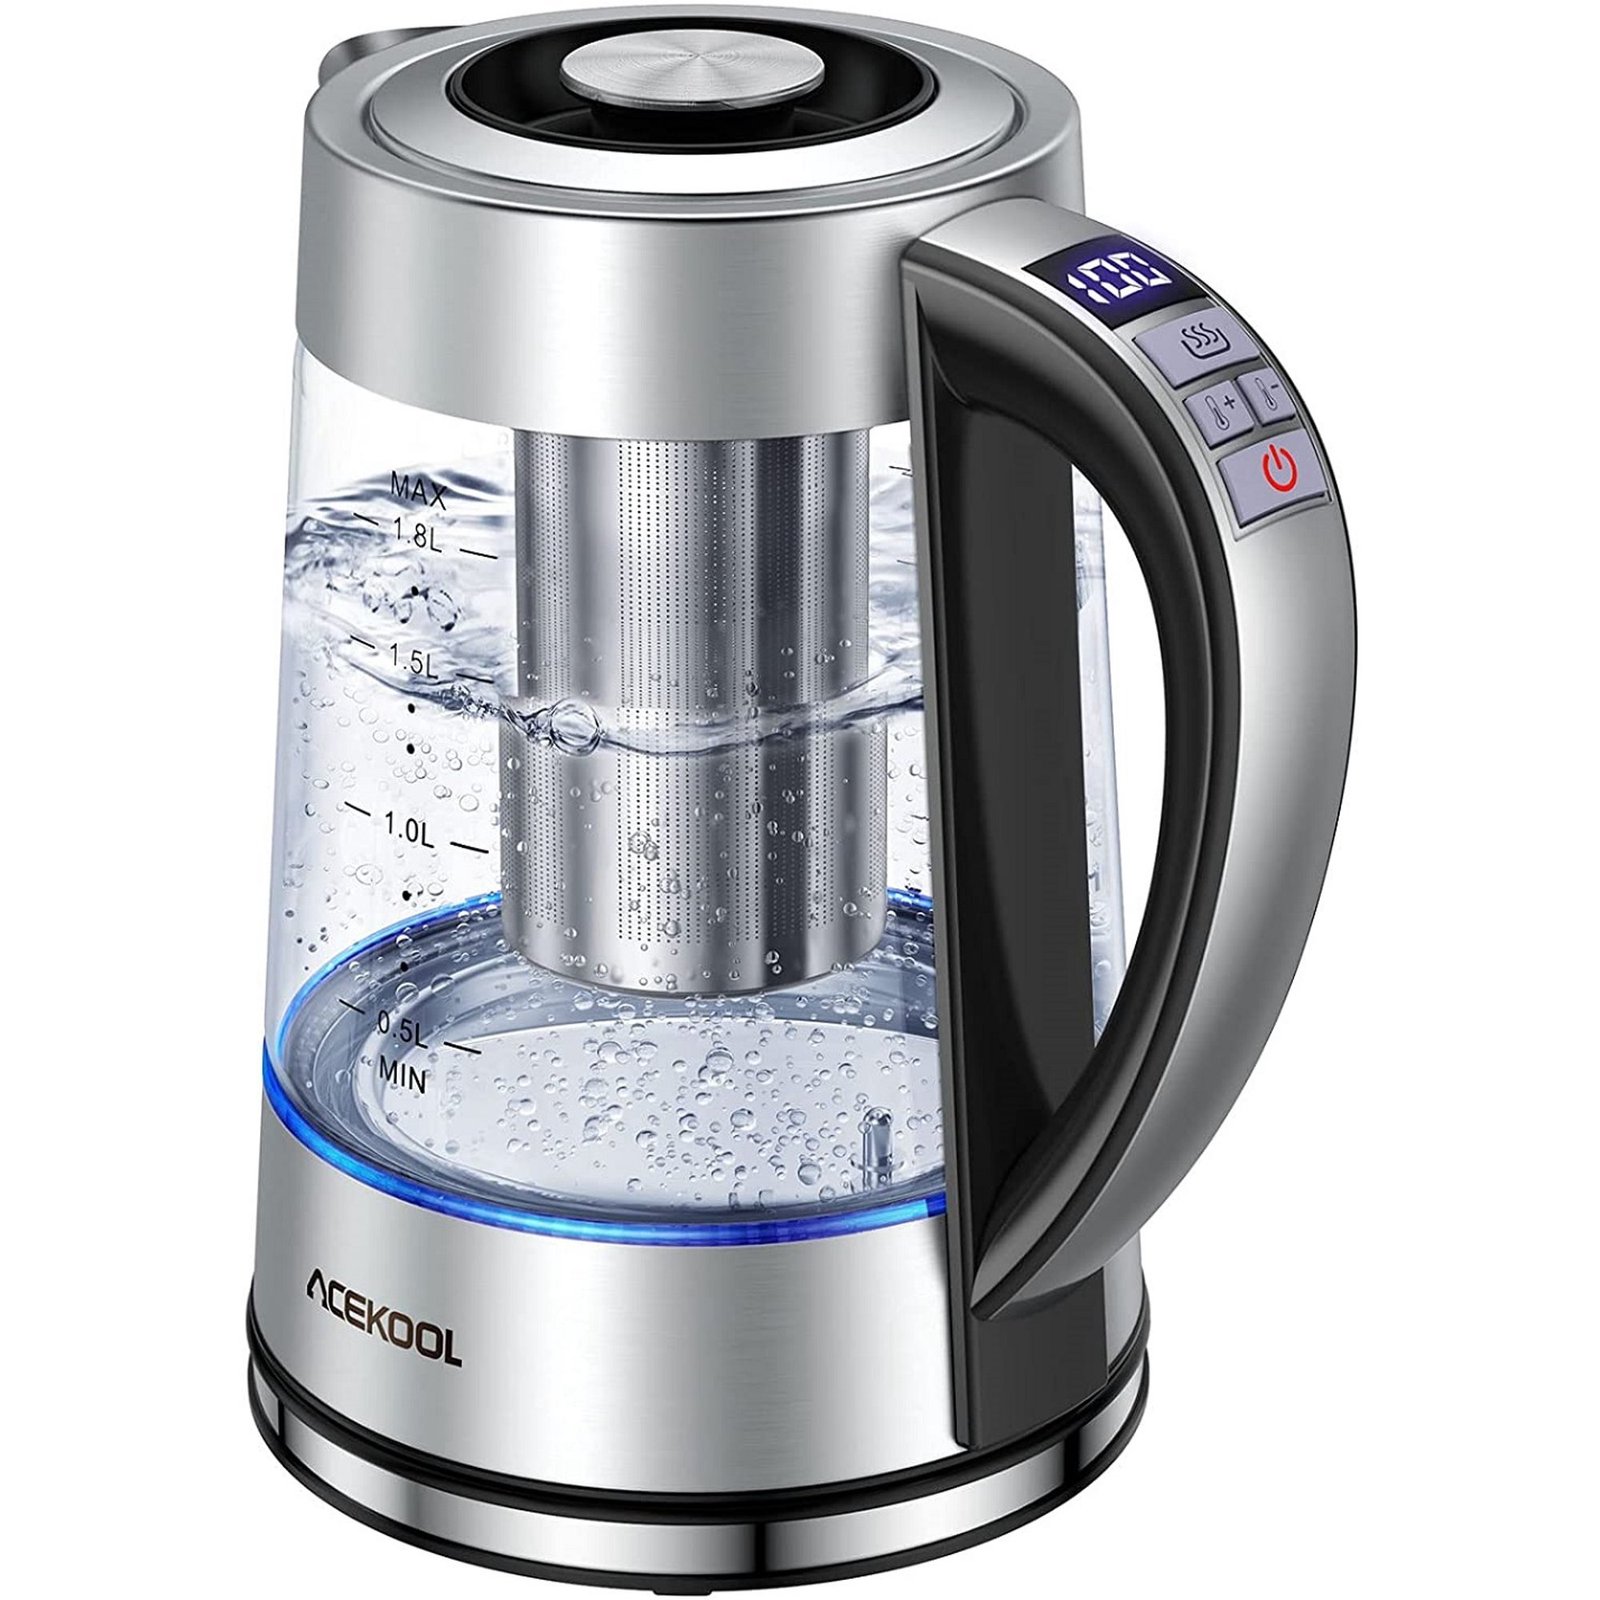 https://themarketdepot.com/wp-content/uploads/2023/01/ACEKOOL-Silver-Electric-Kettle-1.8L-63oz-1500W-Tea-kettle-with-12-Tem-Control-LED-Water-Temperature-Indicator30-Seconds-Auto-Shut-Off-Boil-Dry-Protection-BPA-Free-1.jpeg